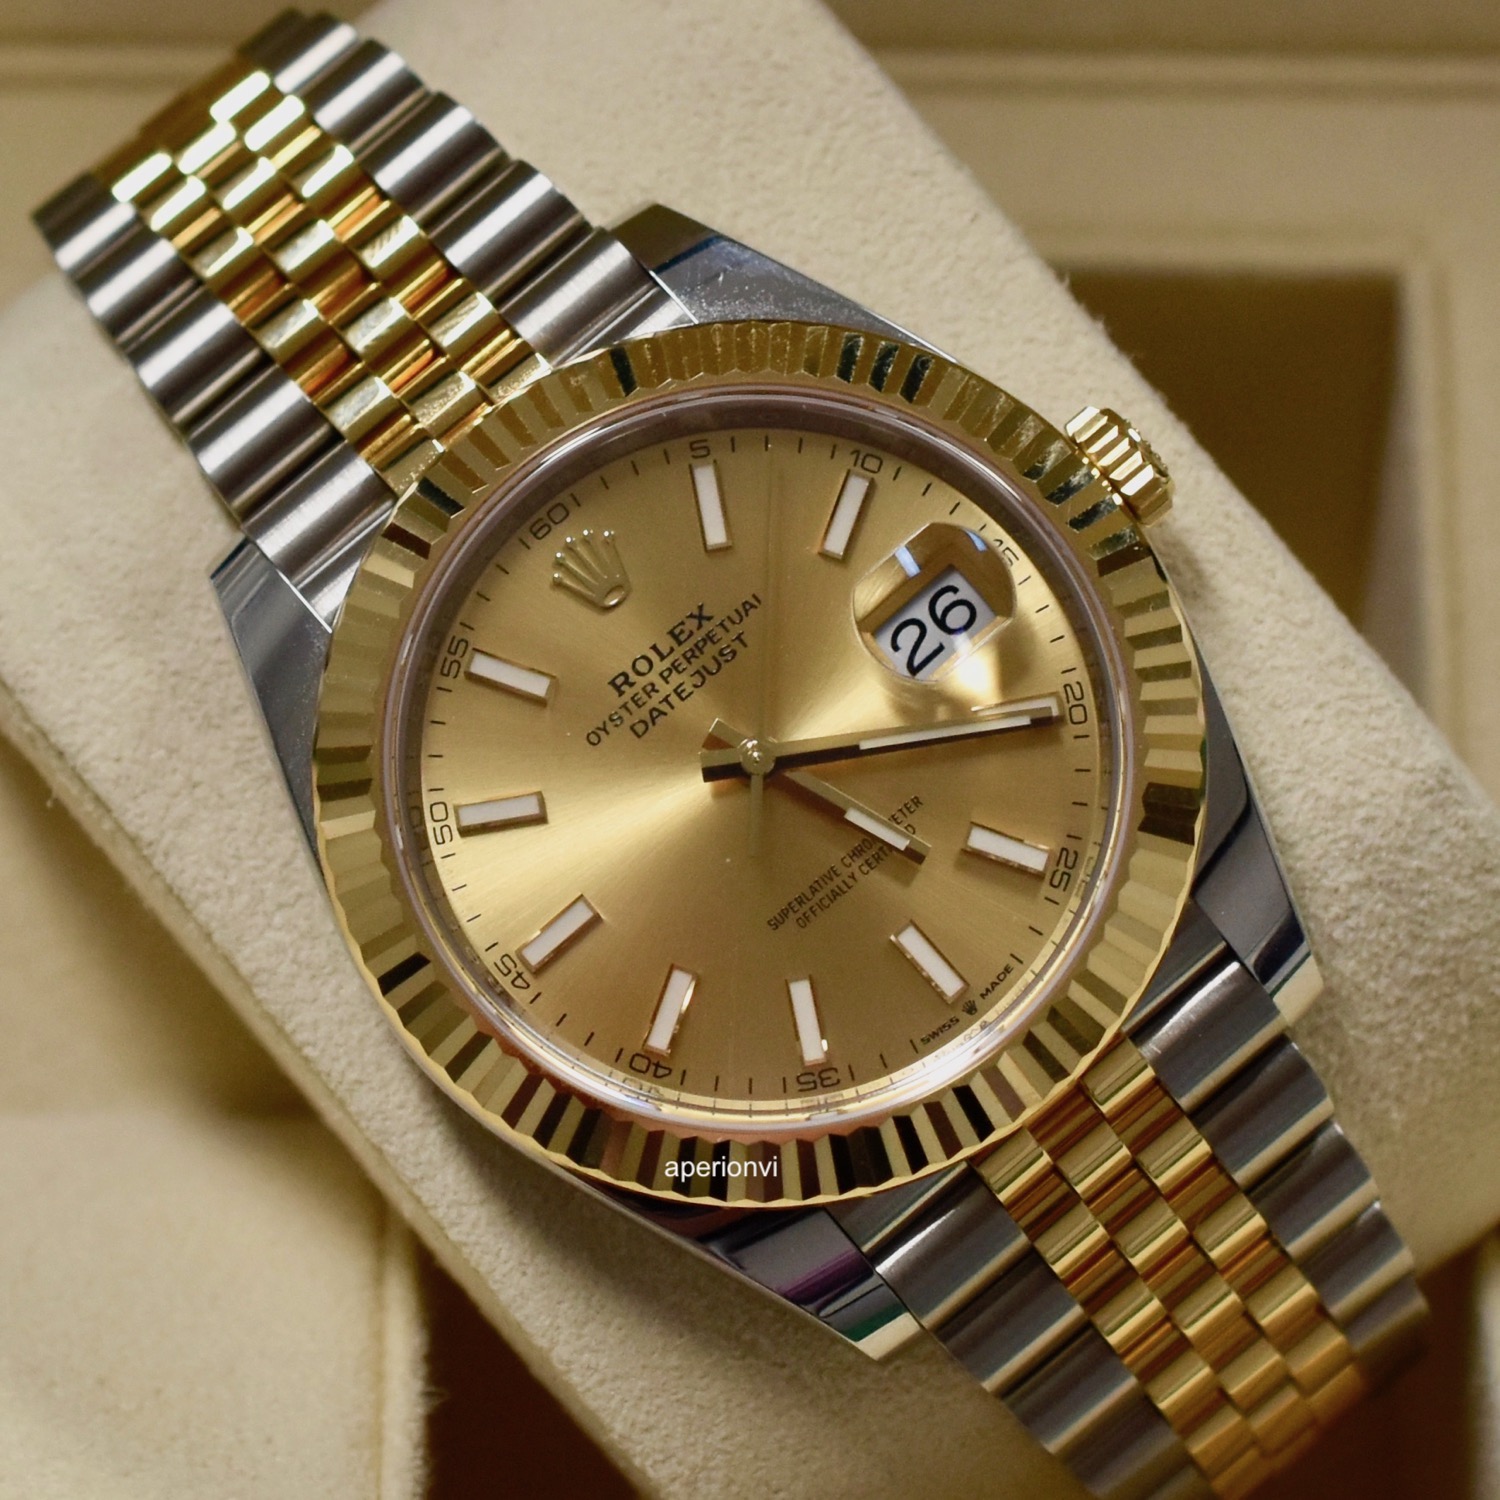 datejust champagne dial